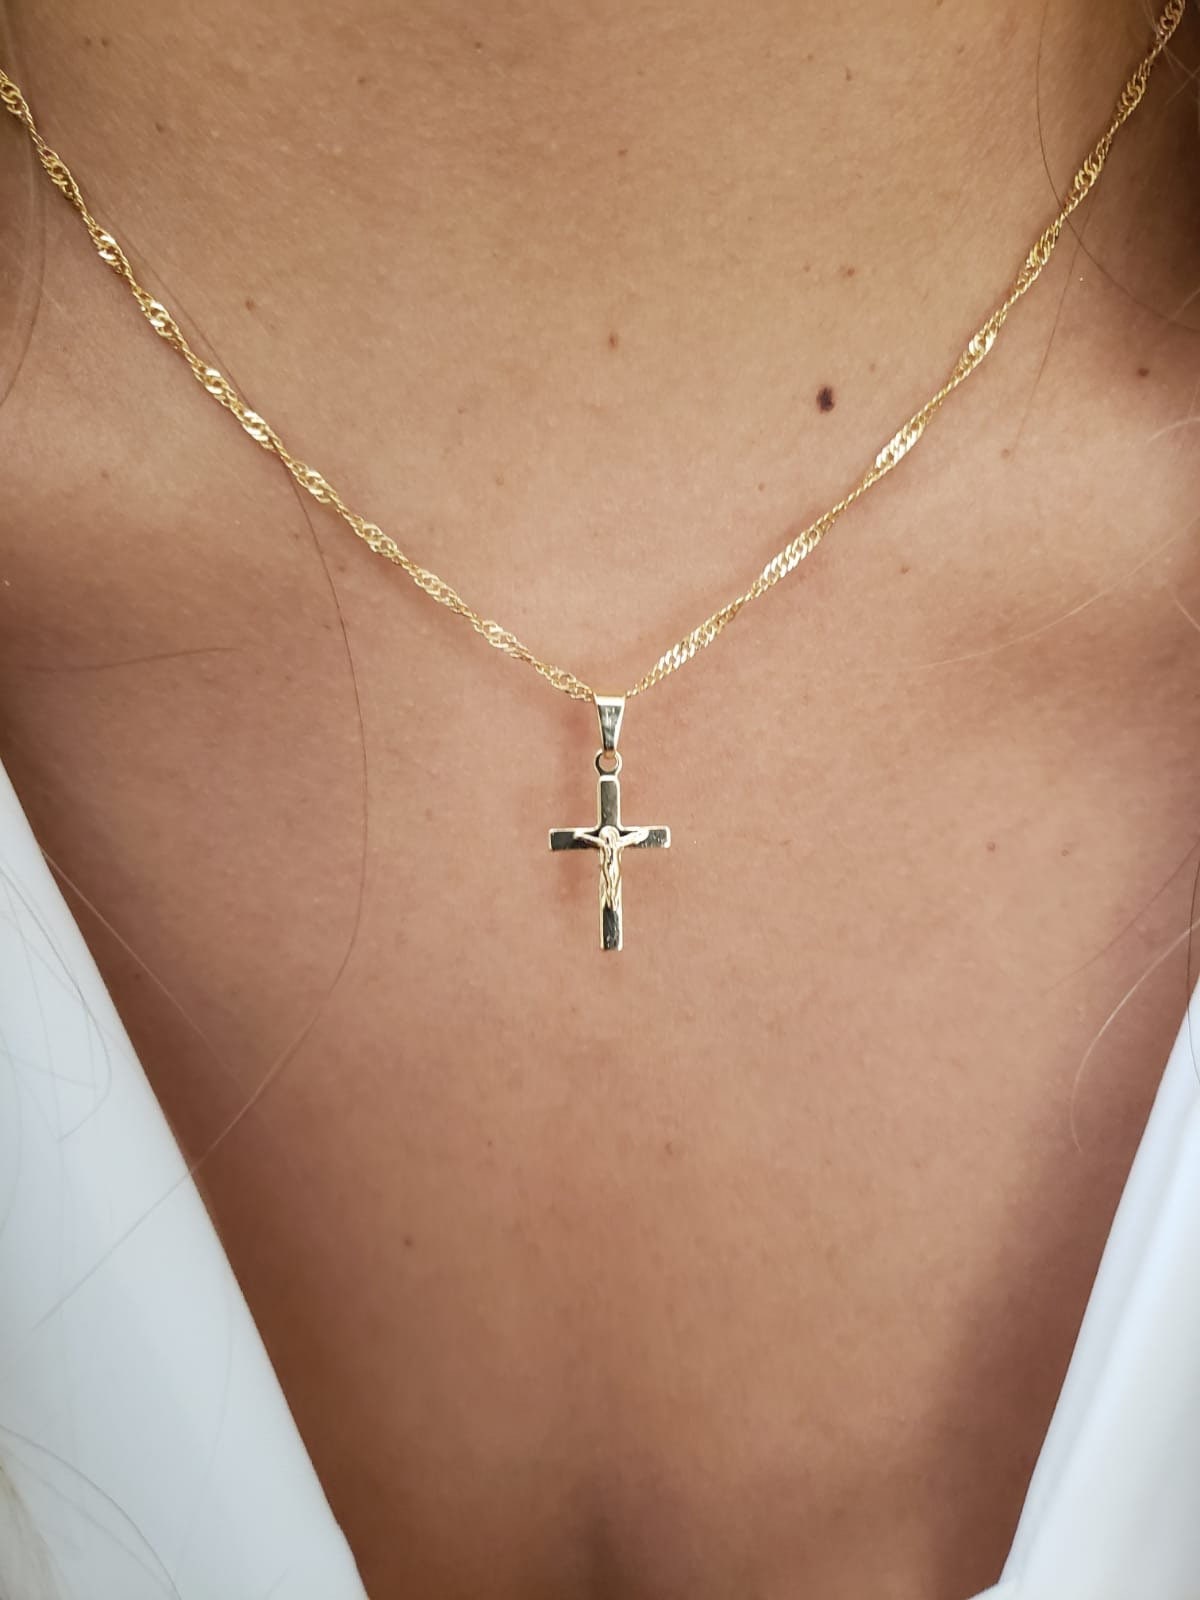 Cross Pendant Necklace 18K Yellow Gold Filled Lucky Link 18"Chain Jewelry 